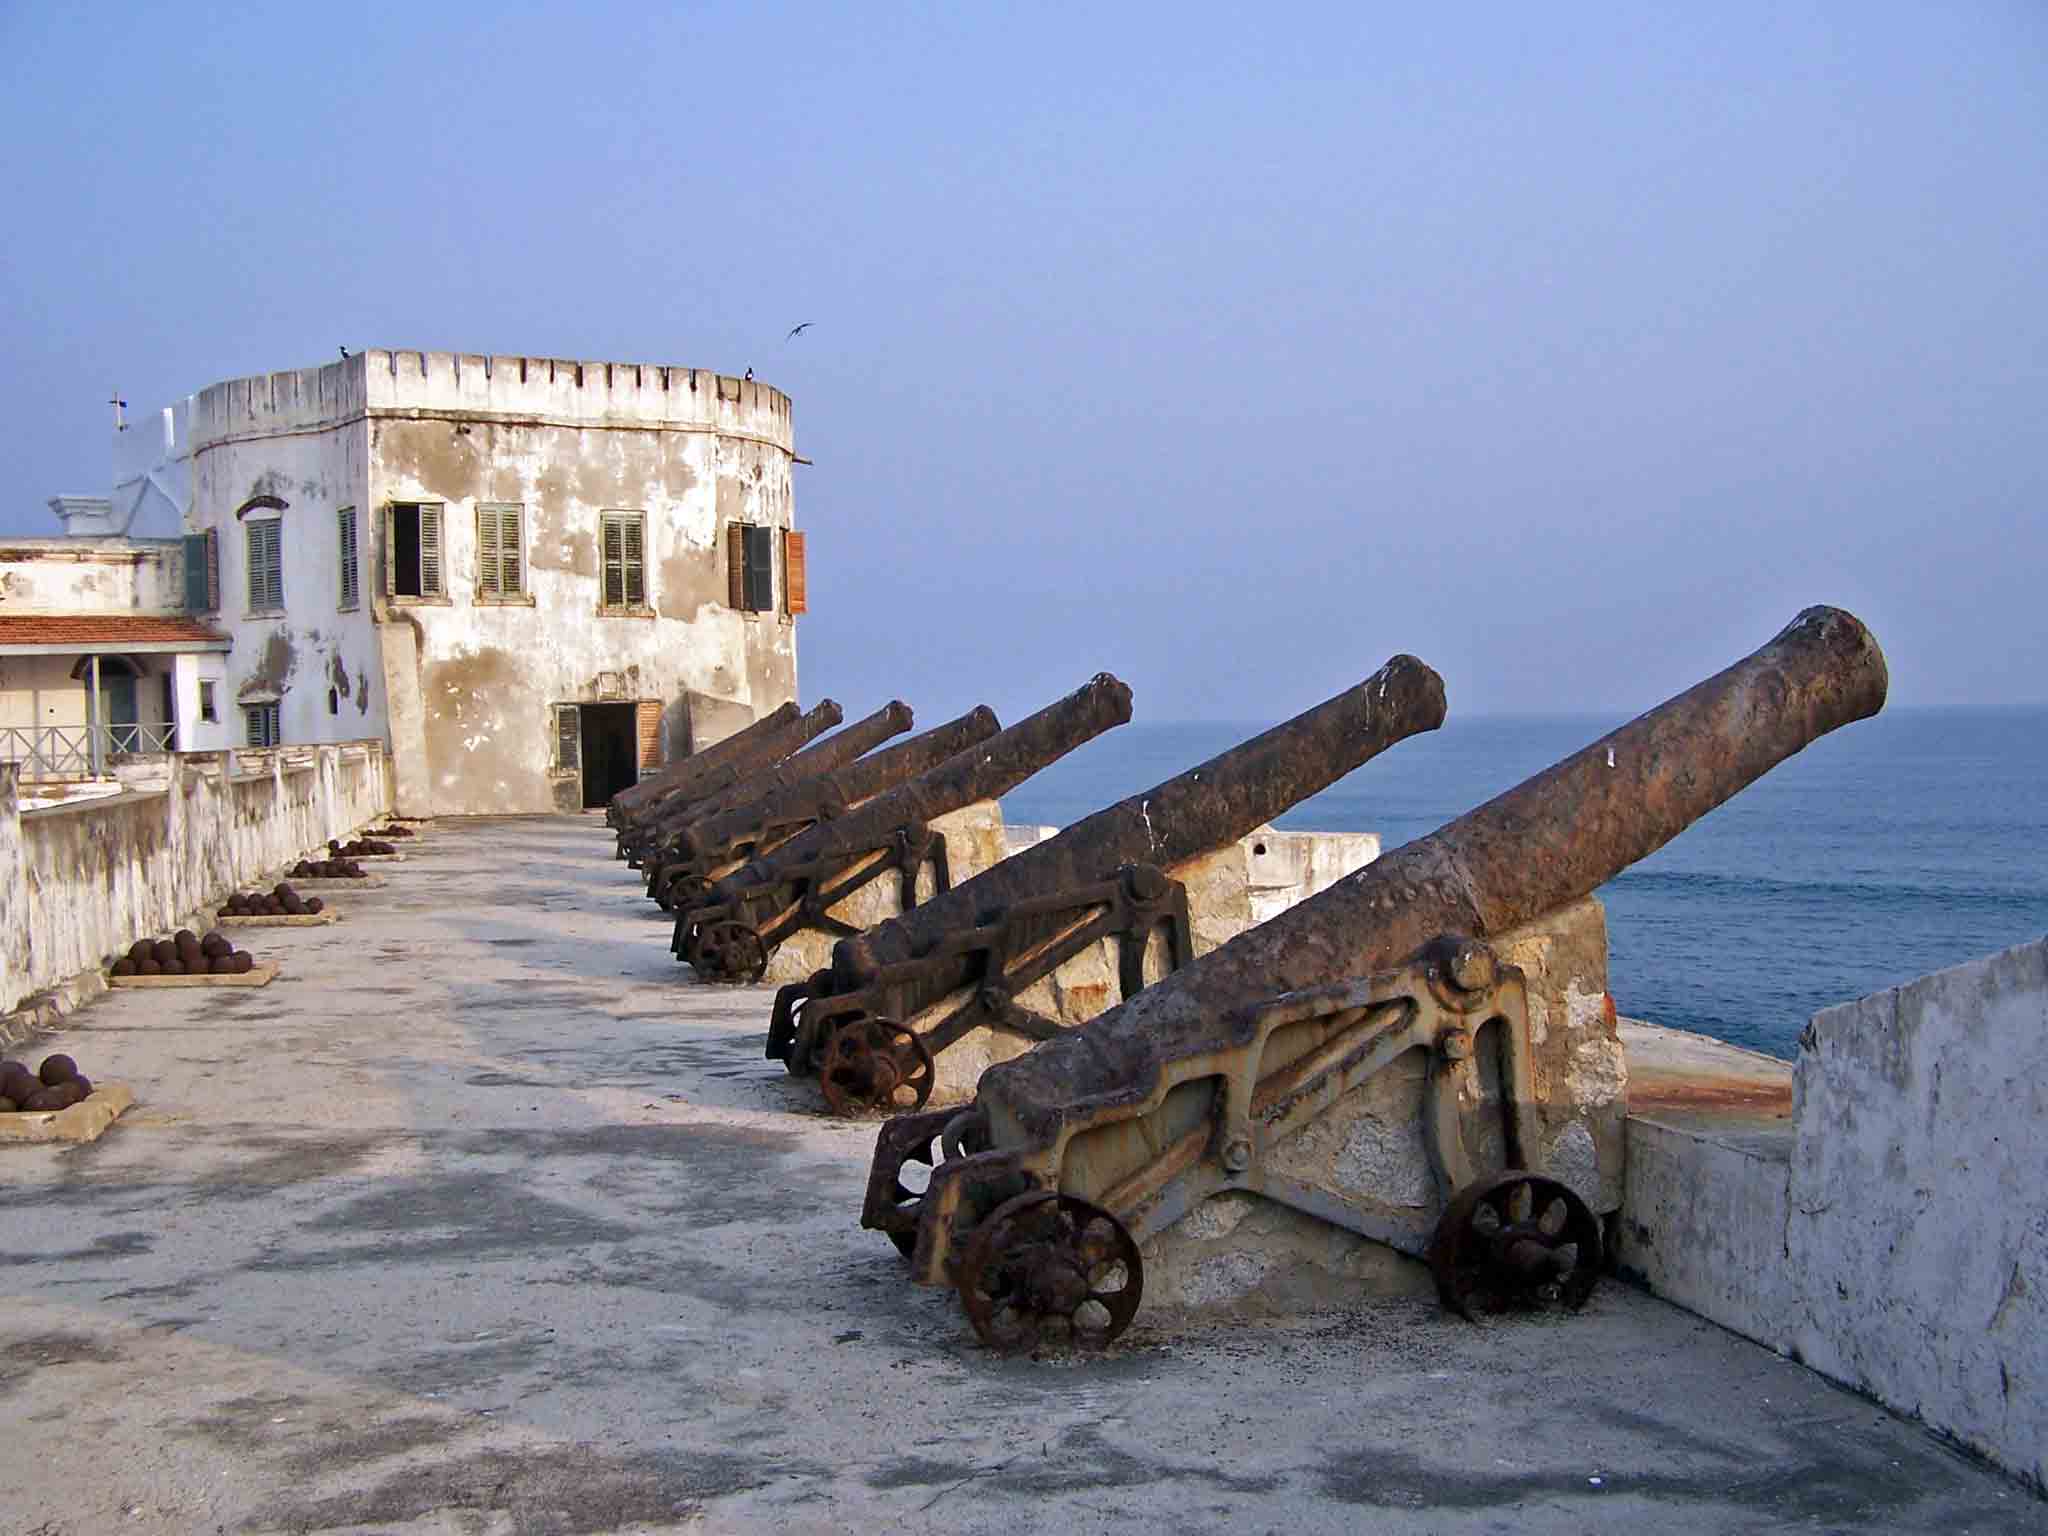 Cannons sitting on a castle wall